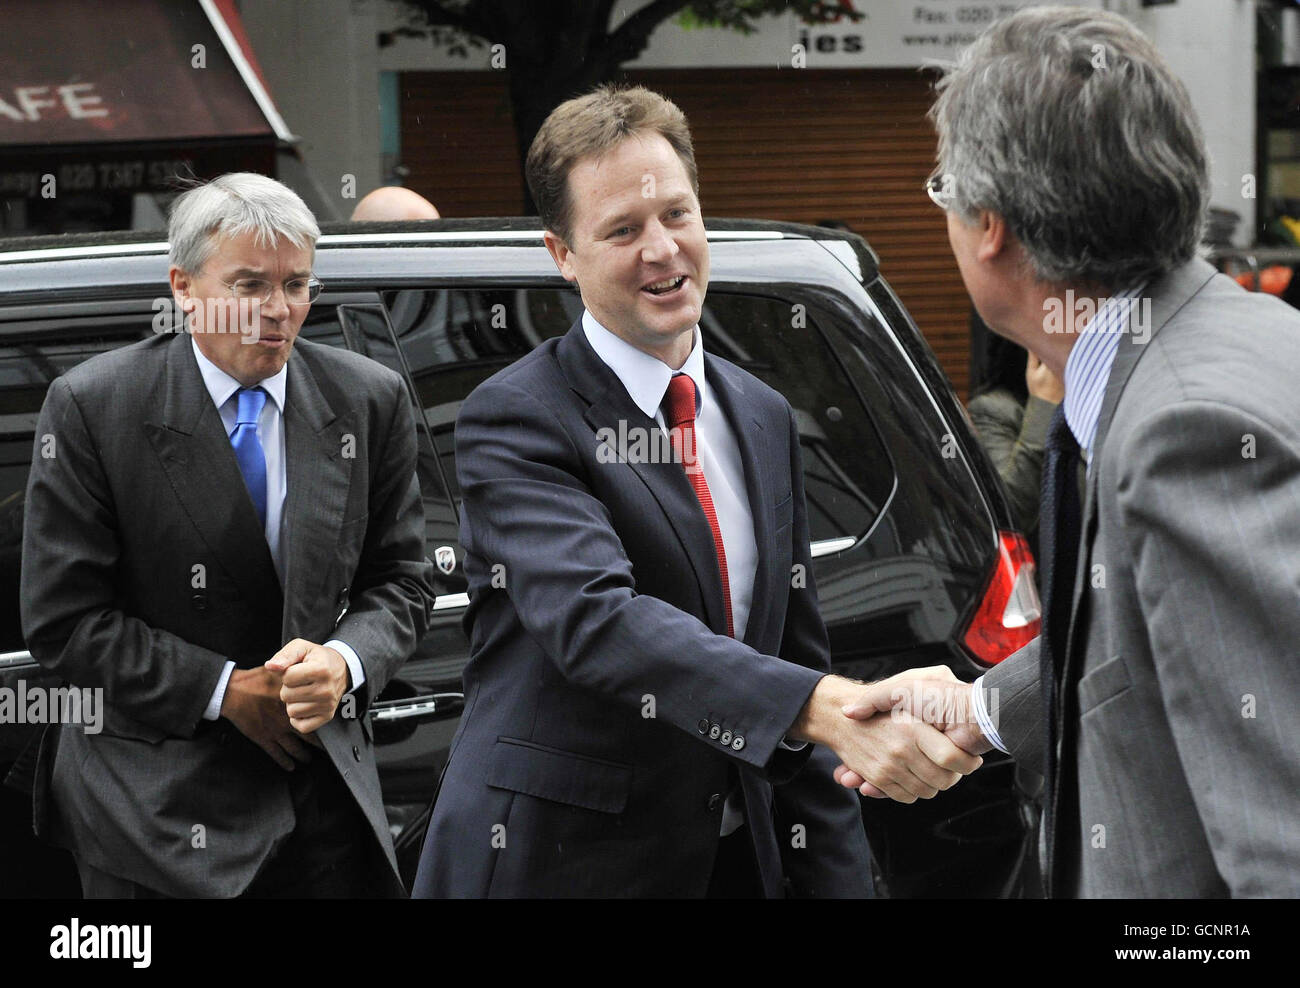 Deputy Prime Minister Nick Clegg and International Development Secretary Andrew Mitchell (left) are greeted by Disasters Emergency Committee CEO Brendan Gormley as they arrive at the headquarters in London. Stock Photo